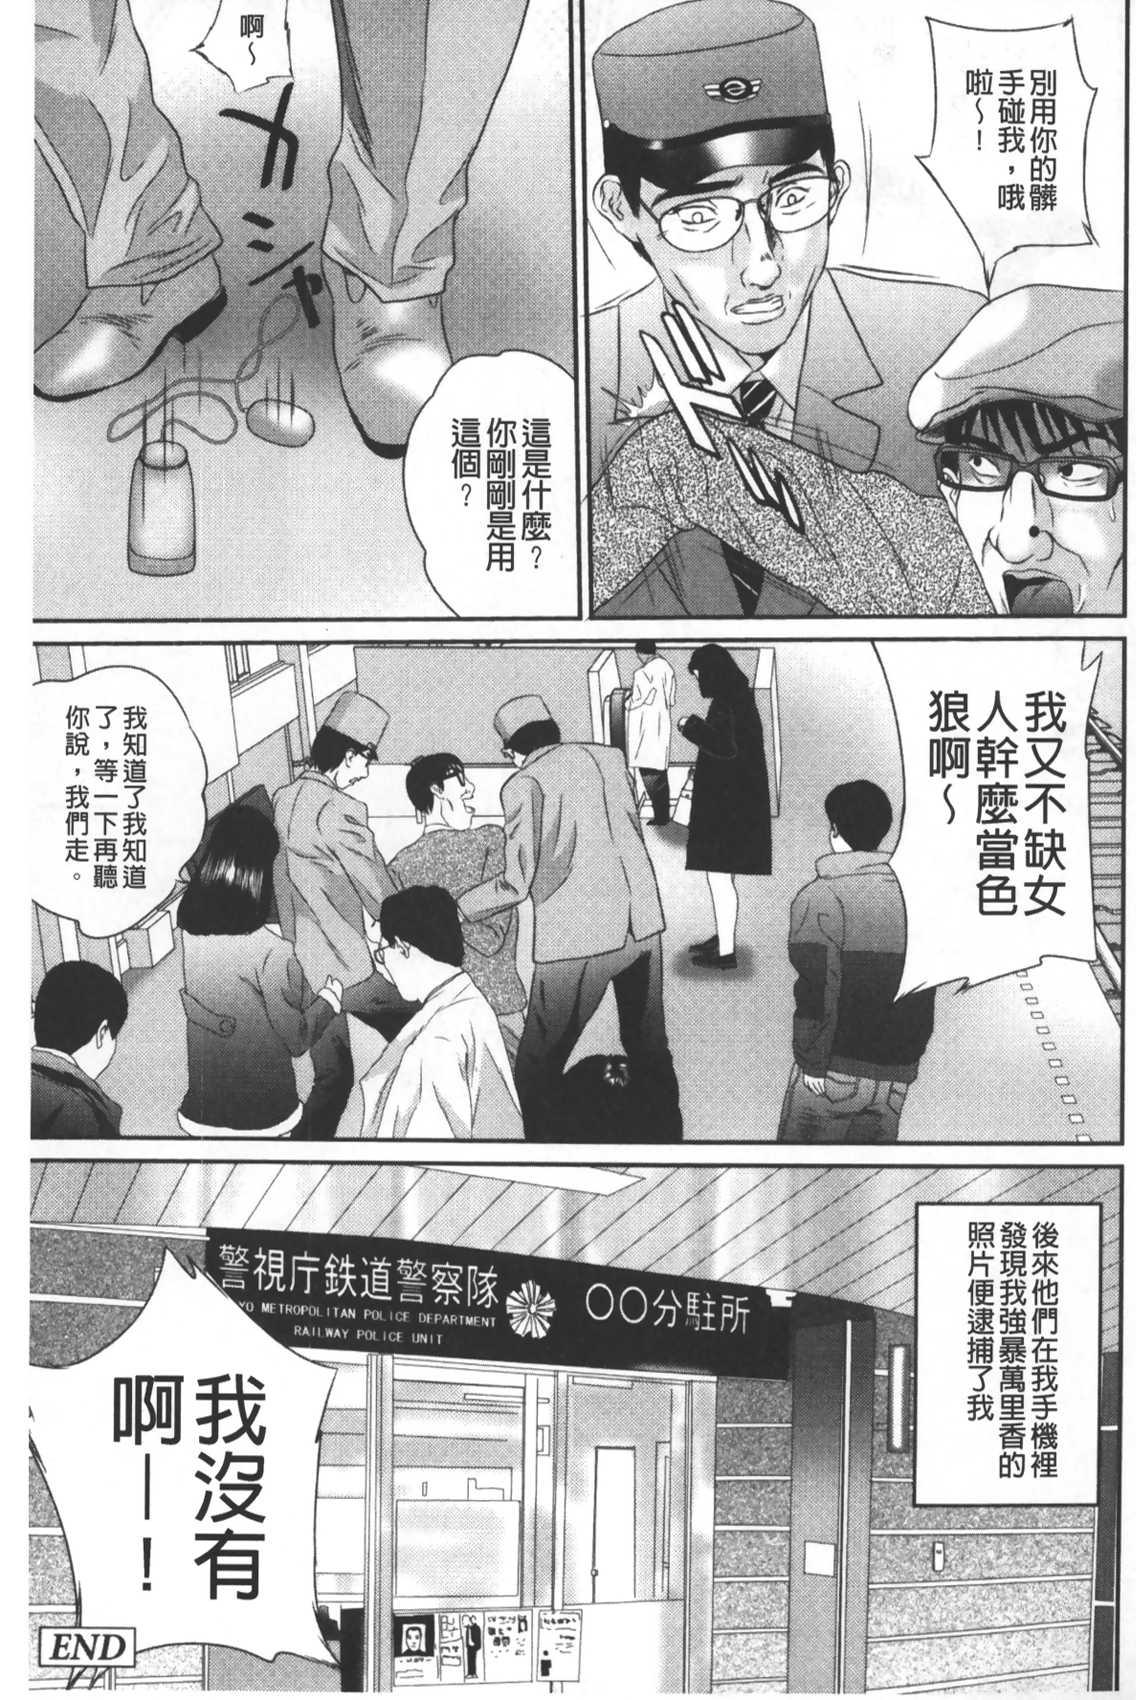 Mouth Tousatsu Collector | 盜拍題材精選集 Uncensored - Page 176